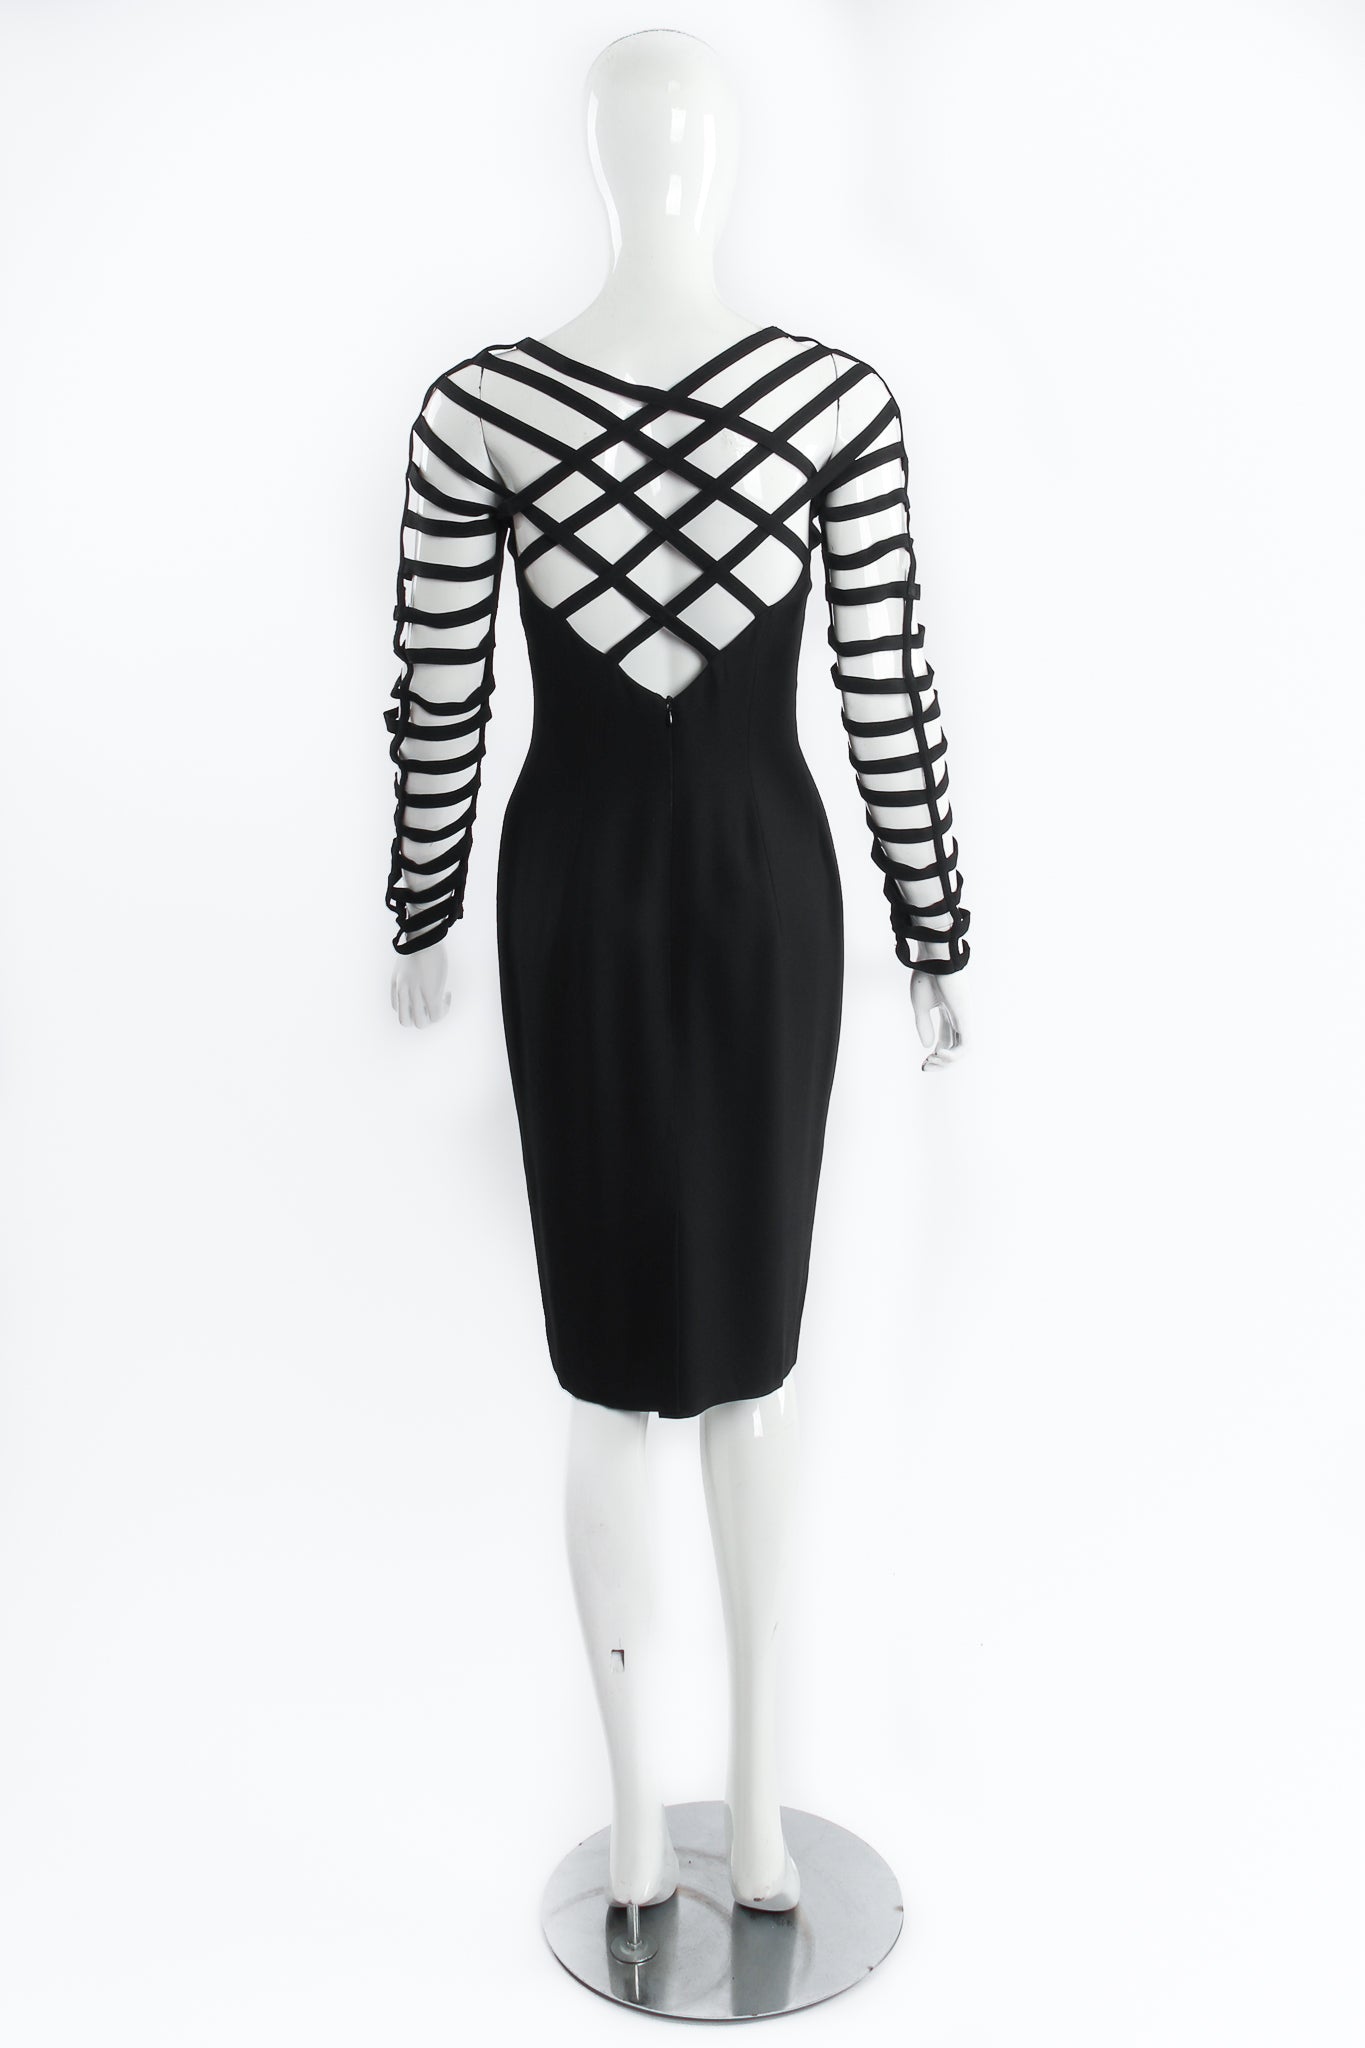 Vintage Sophie Sitbon Strappy Cage Cocktail Sheath Dress on Mannequin back at Recess Los Angeles